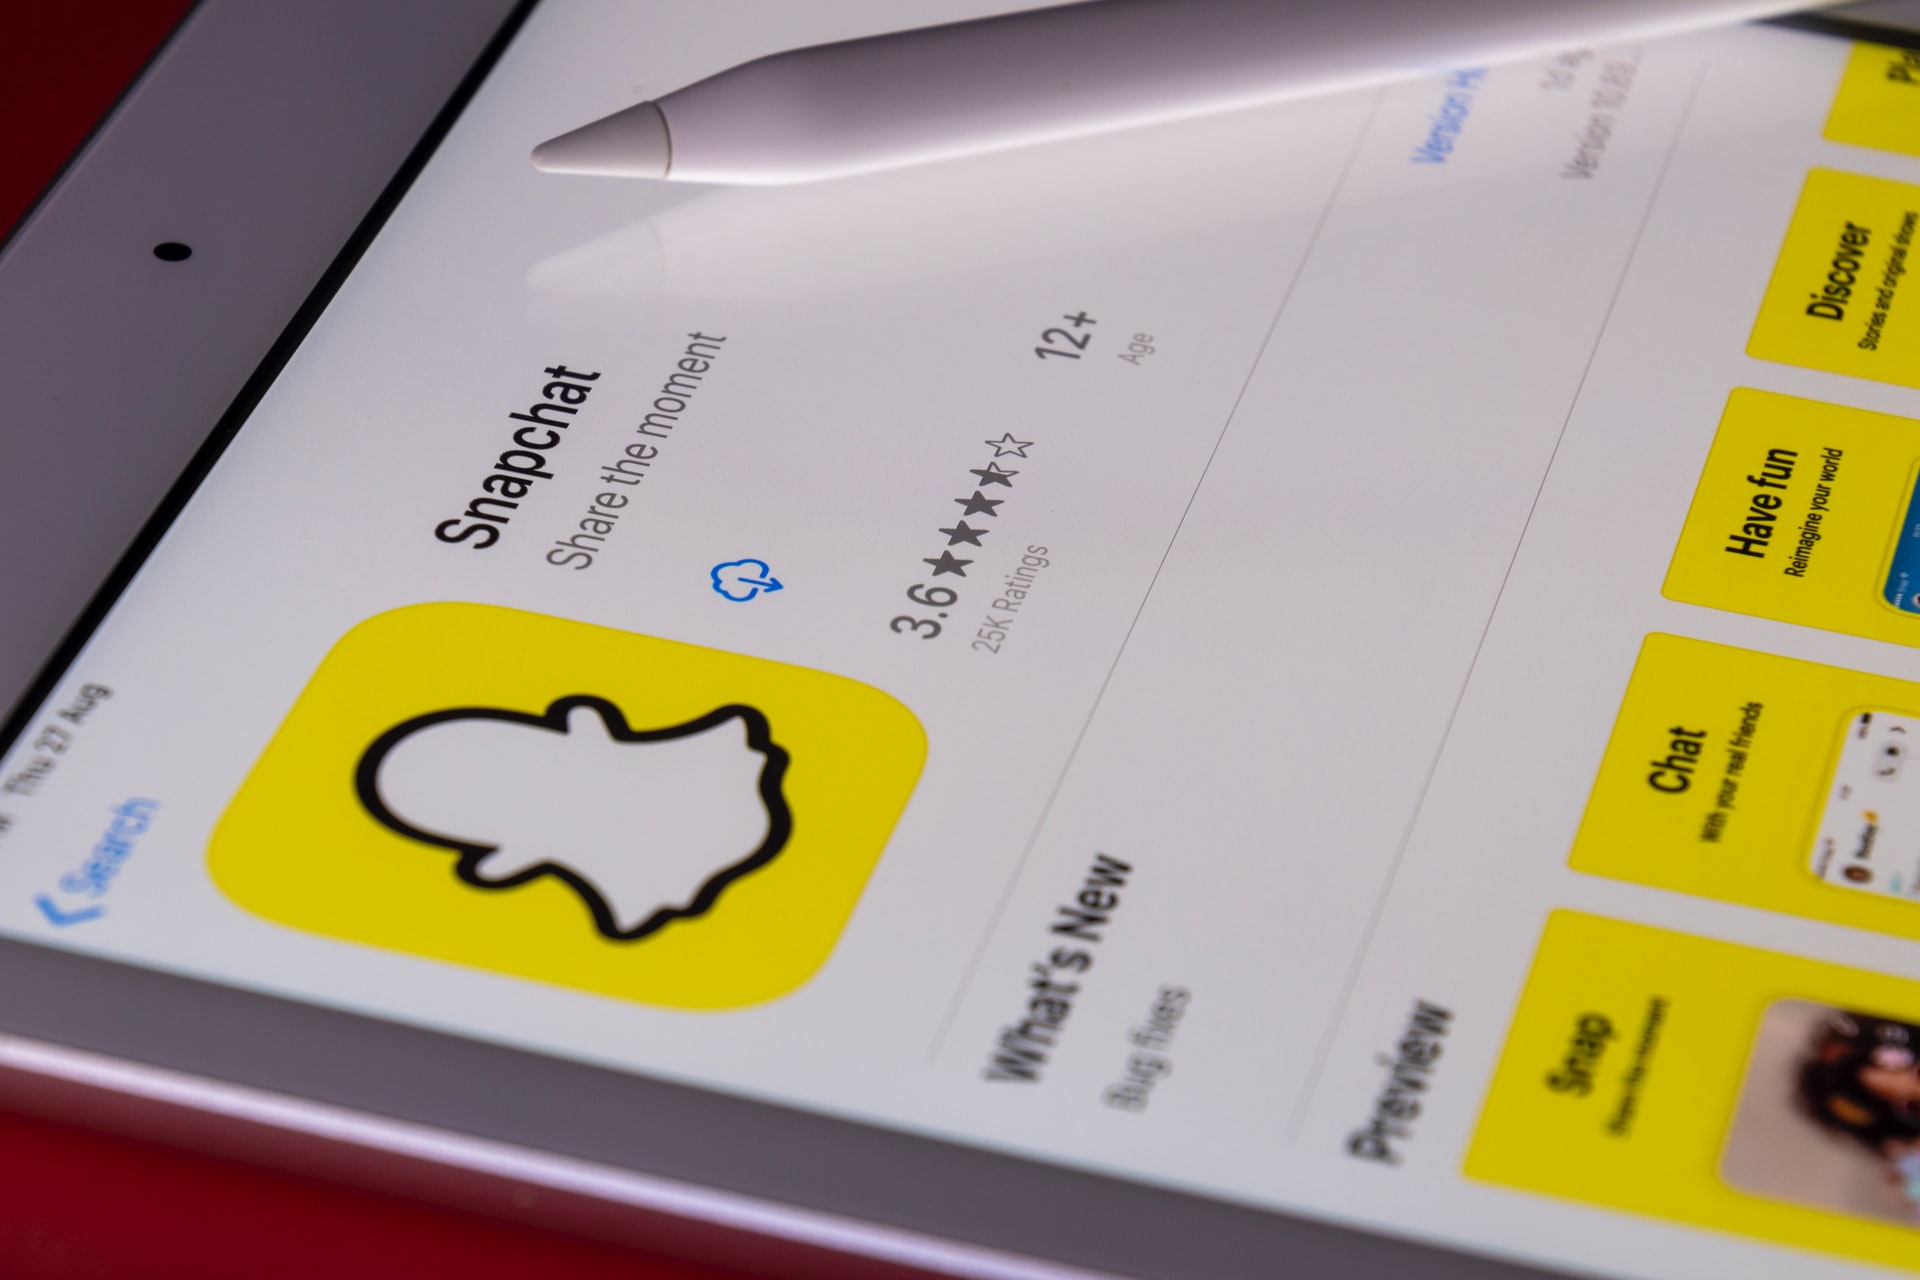 Snap’s Second and the Region’s First Creator Studio to Open in Riyadh in 2022